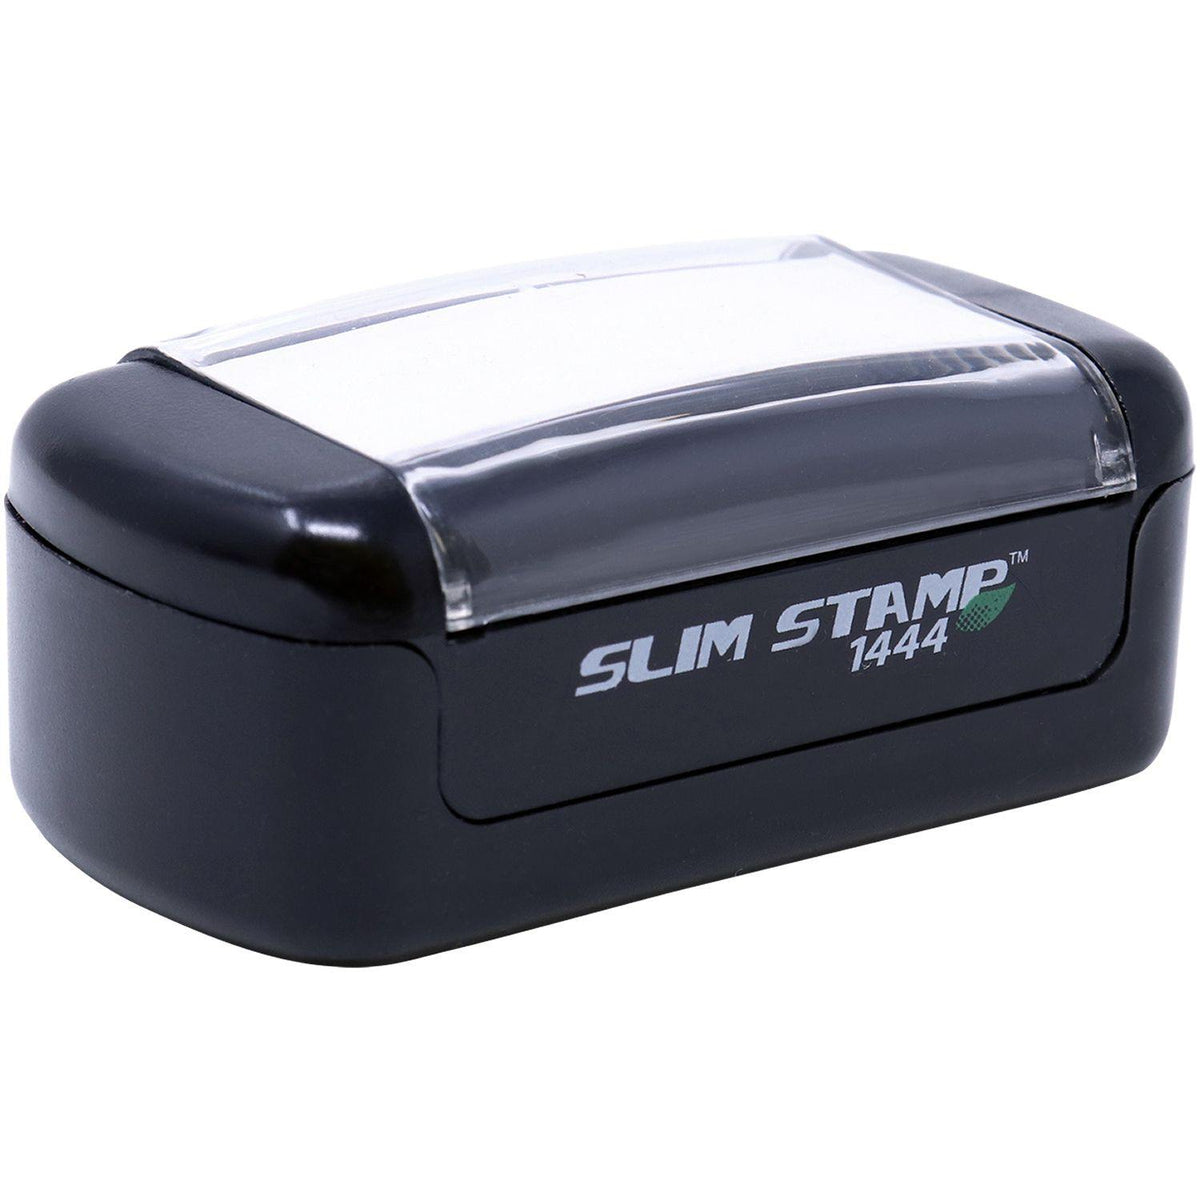 Alt View of Slim Pre Inked Disclosures Stamp Mount Angle